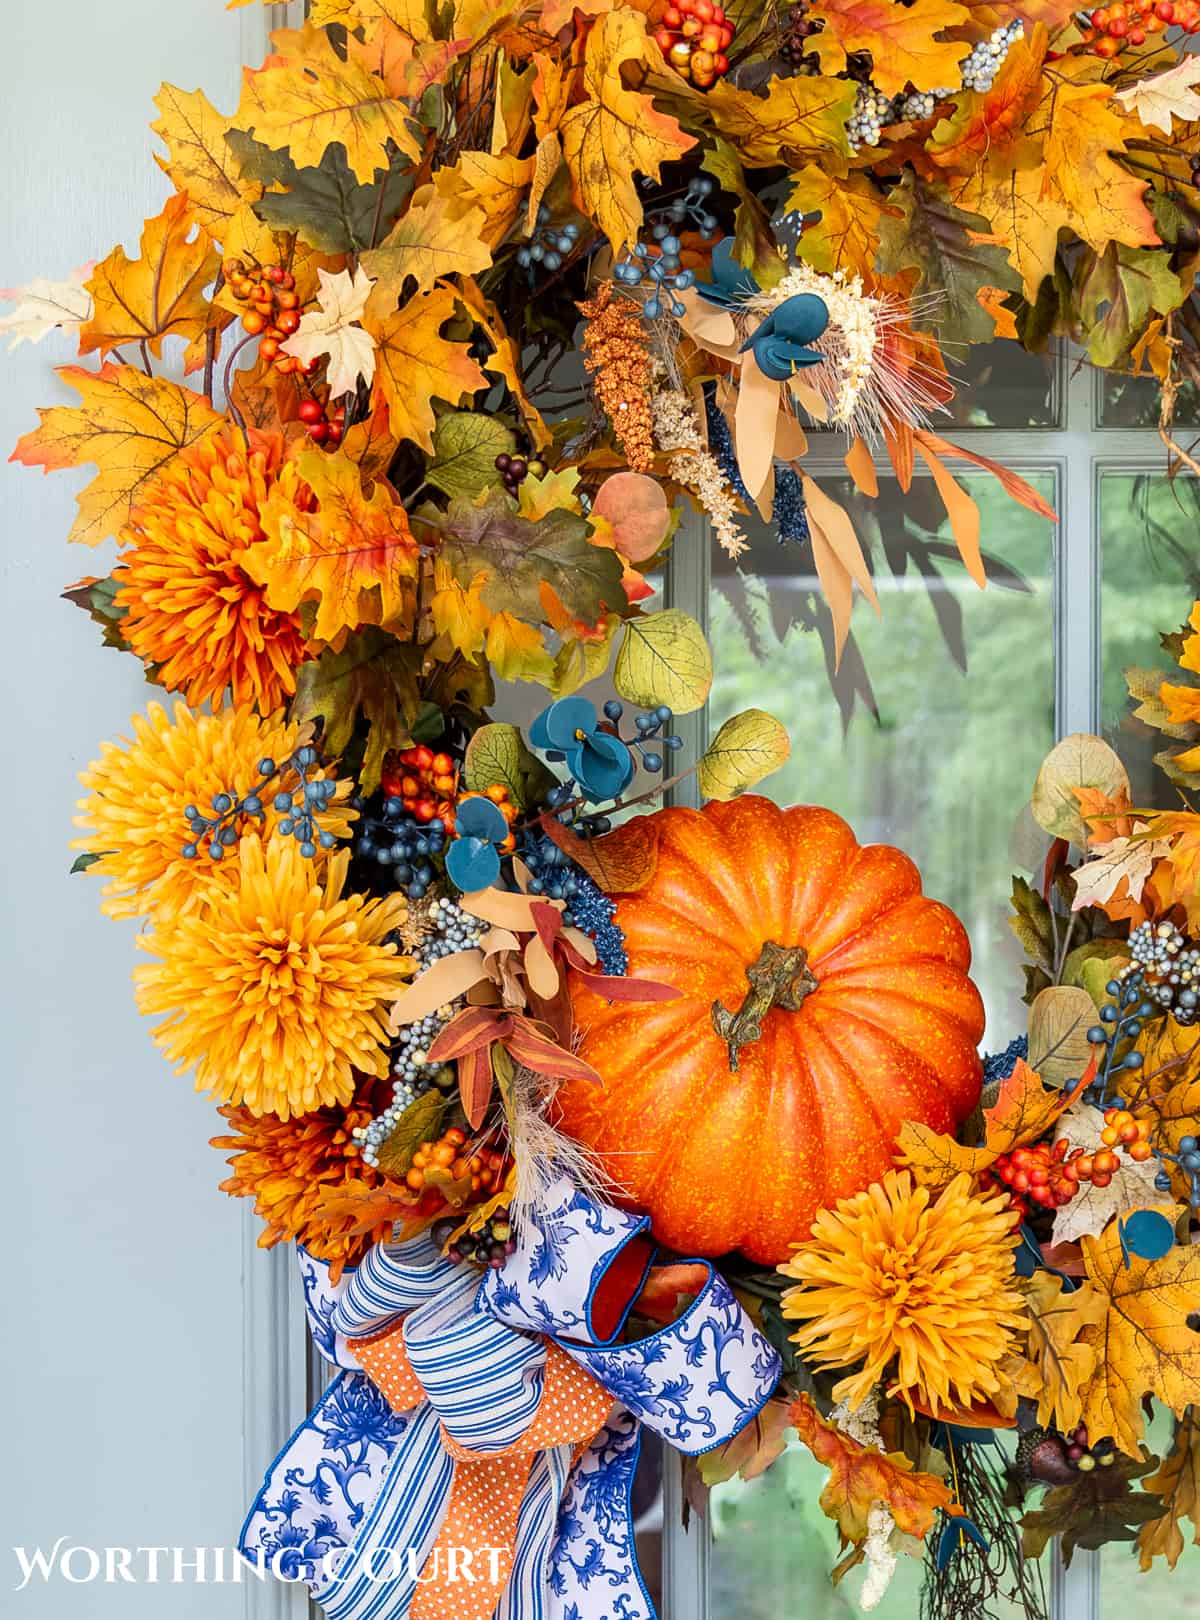 Festive Fall Decor for Your Home or Barn - STABLE STYLE